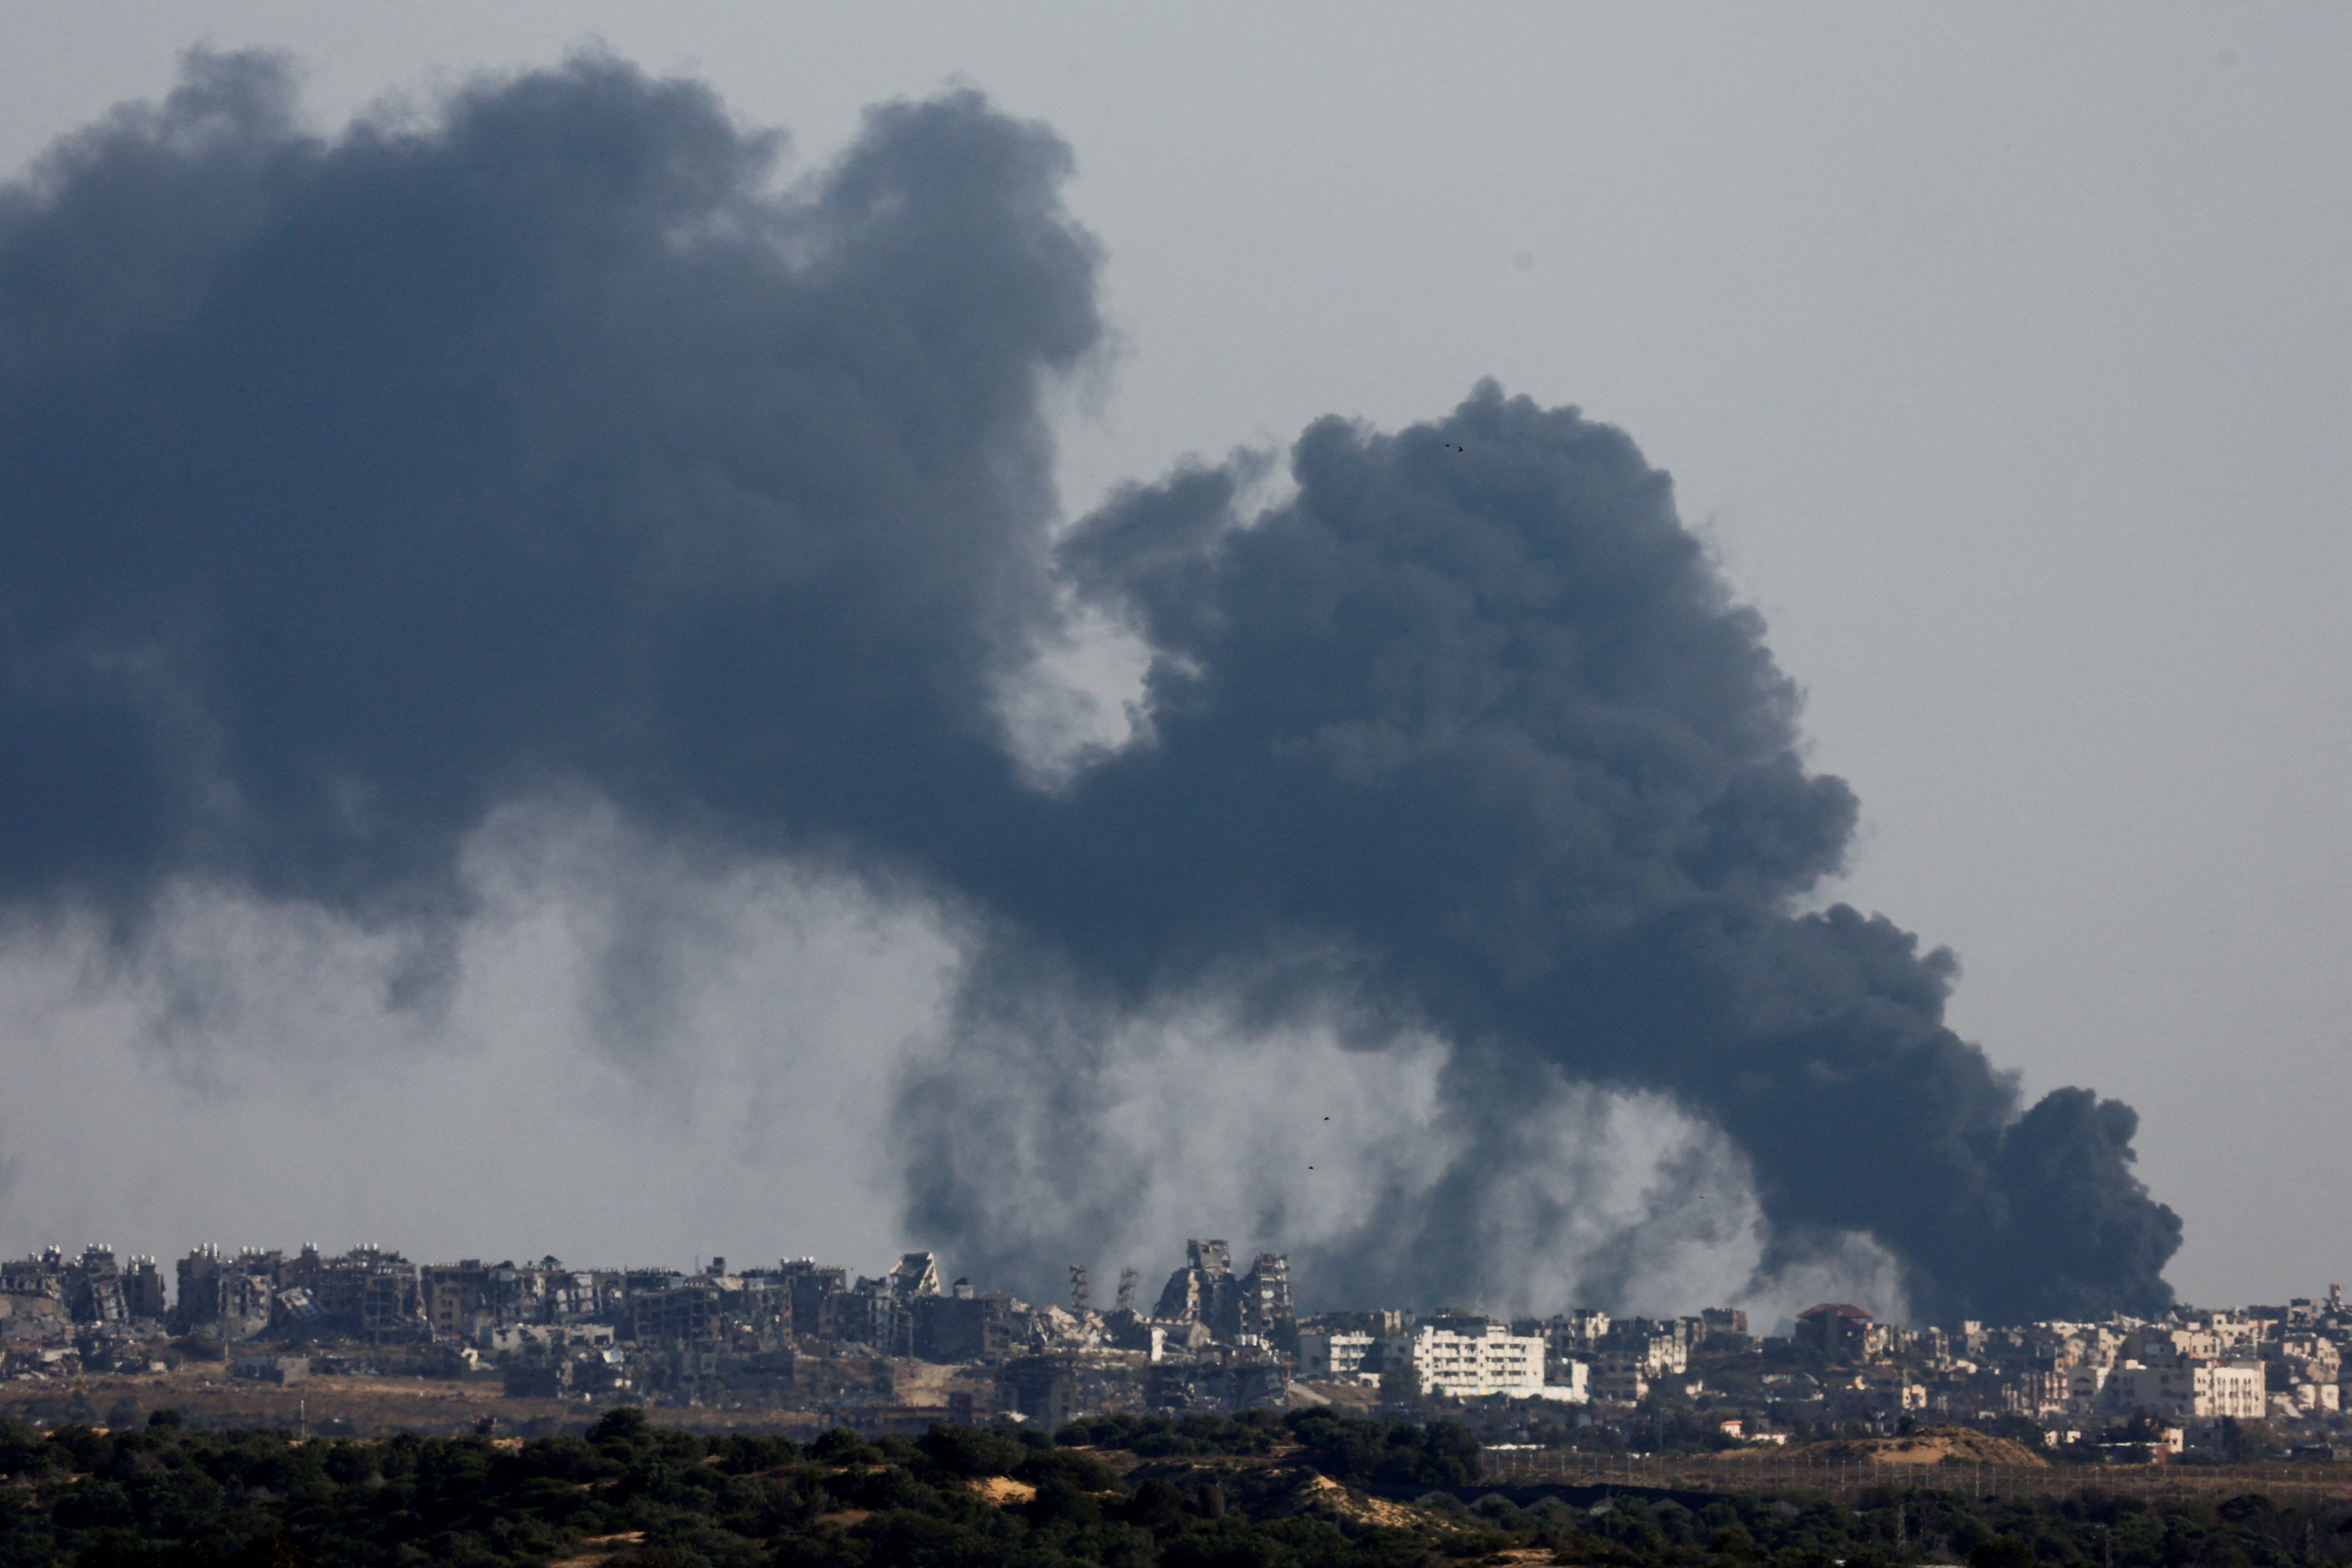 Smoke billows after an explosion in northern Gaza as seen from Israel on Sunday. Photo: Reuters